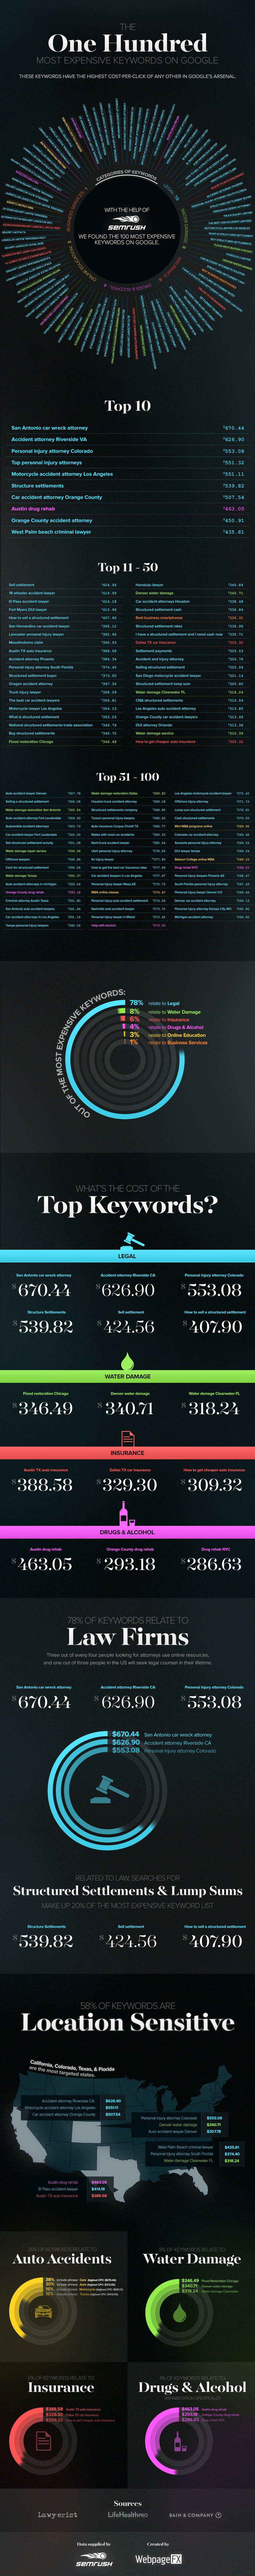 The 100 Most Expensive Keywords on Google